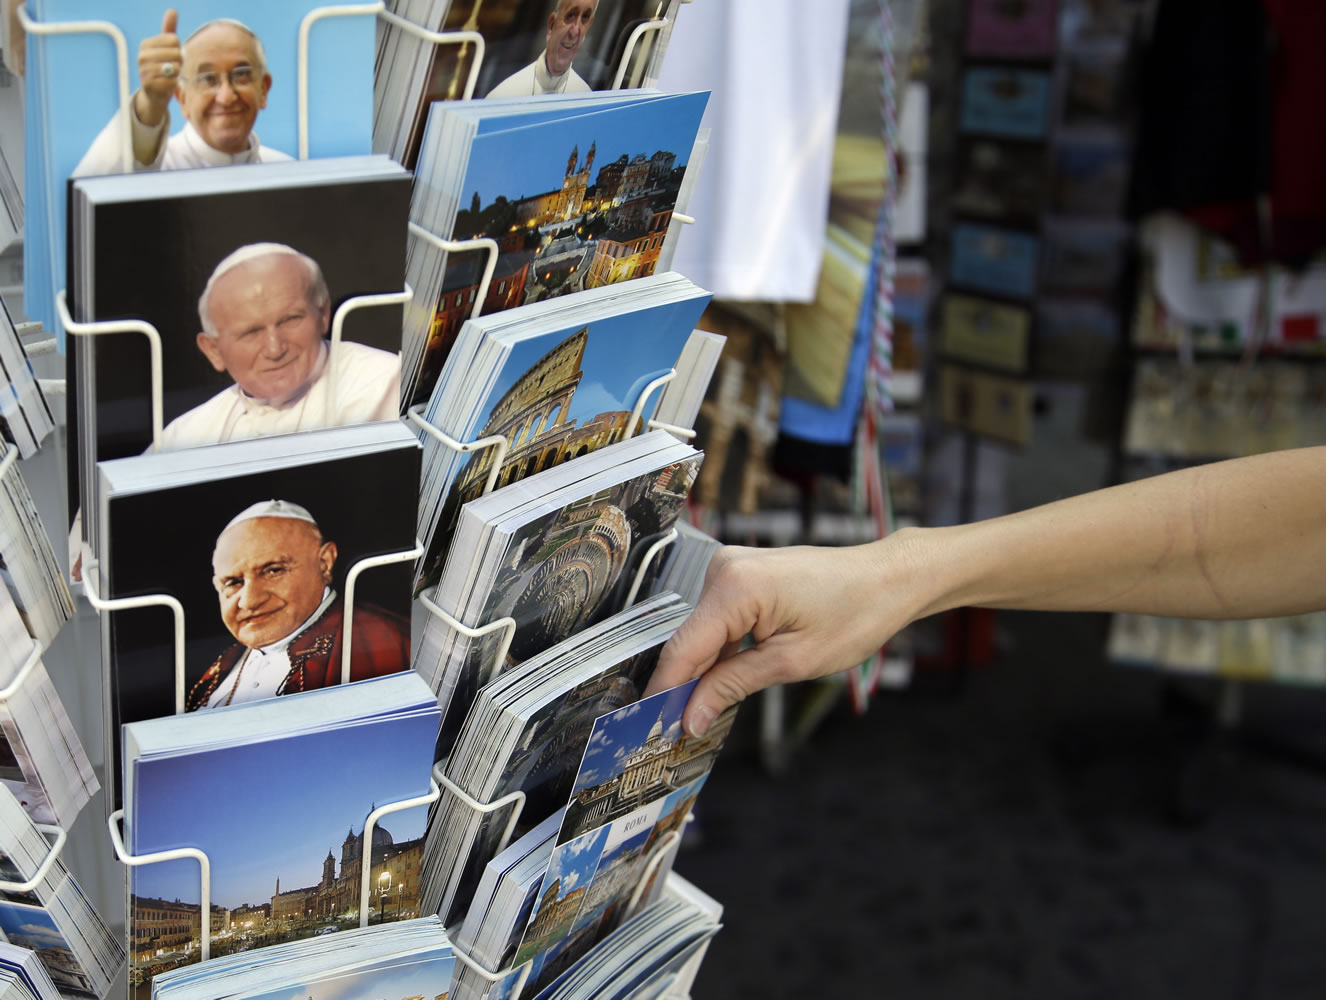 Postcards of pontiffs John XXIII, bottom left, John Paul II, center, and Pope Francis, top, are sold at a kiosk near the Vatican on Friday.